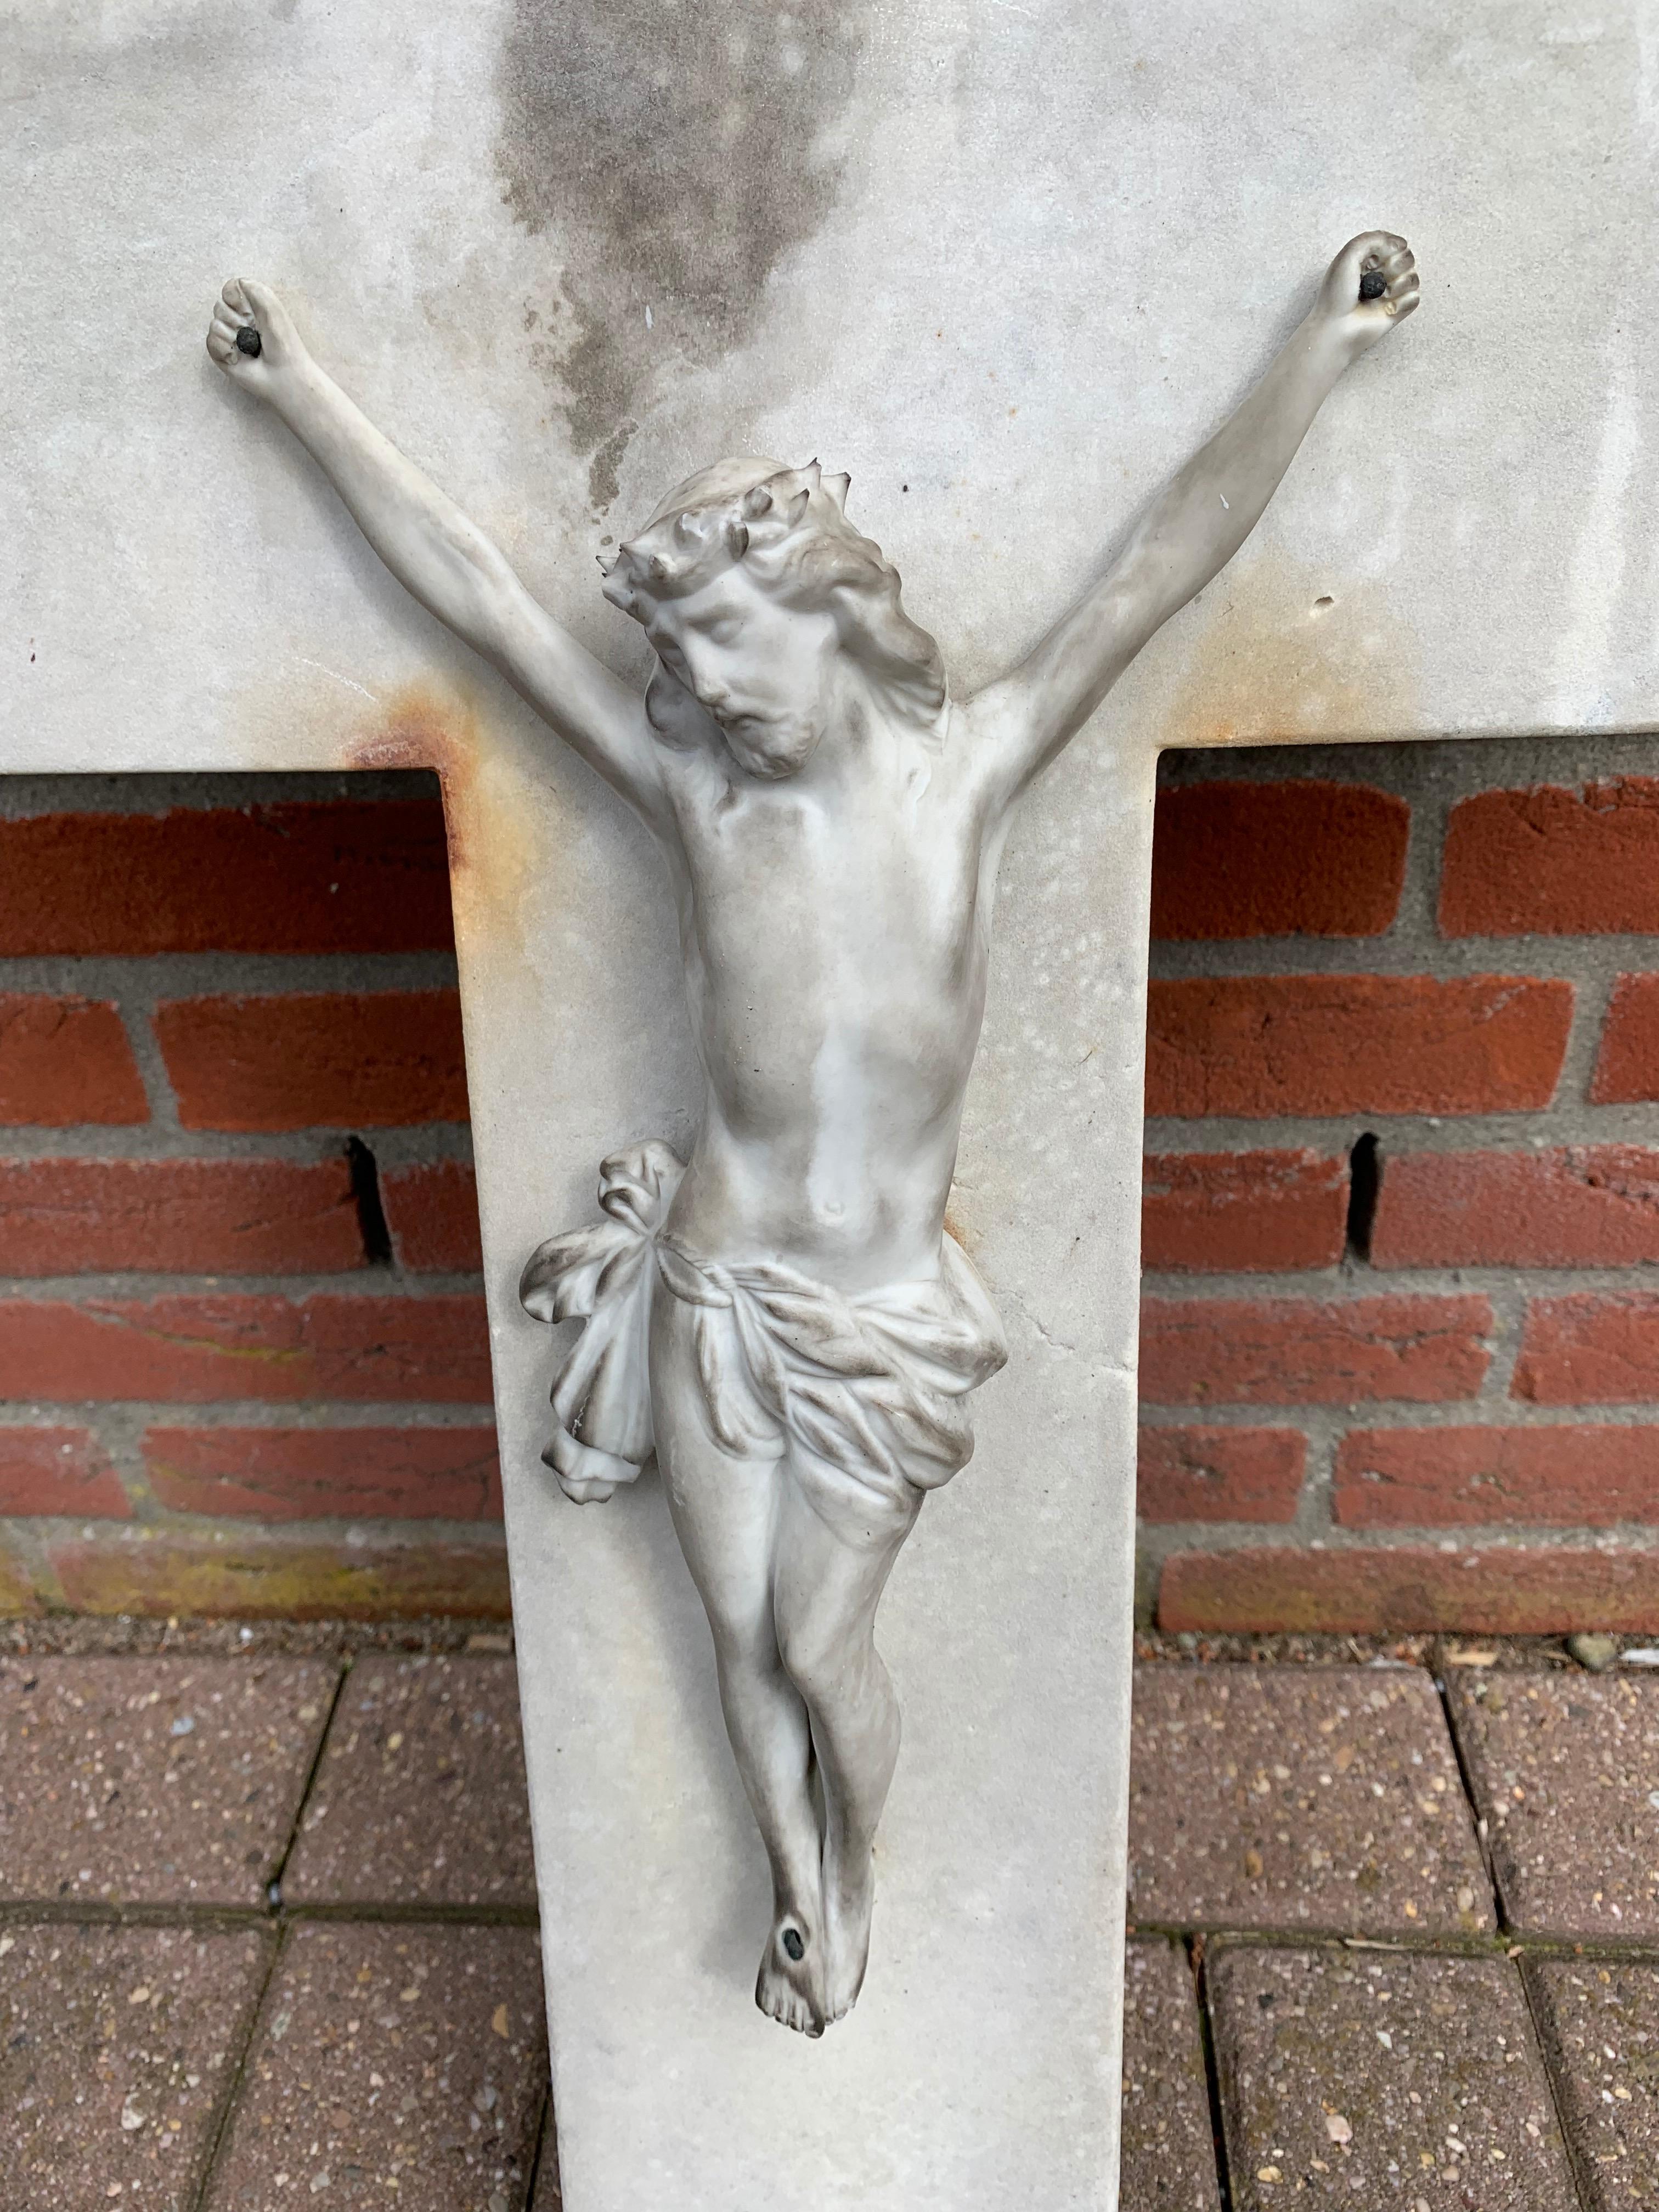 Antique, large and heavy work of religious art.

If you are looking for rare and eye-catching antiques then this recent find could be perfect for you. This rare crucifix is entirely hand carved out of solid, white marble which also makes it the